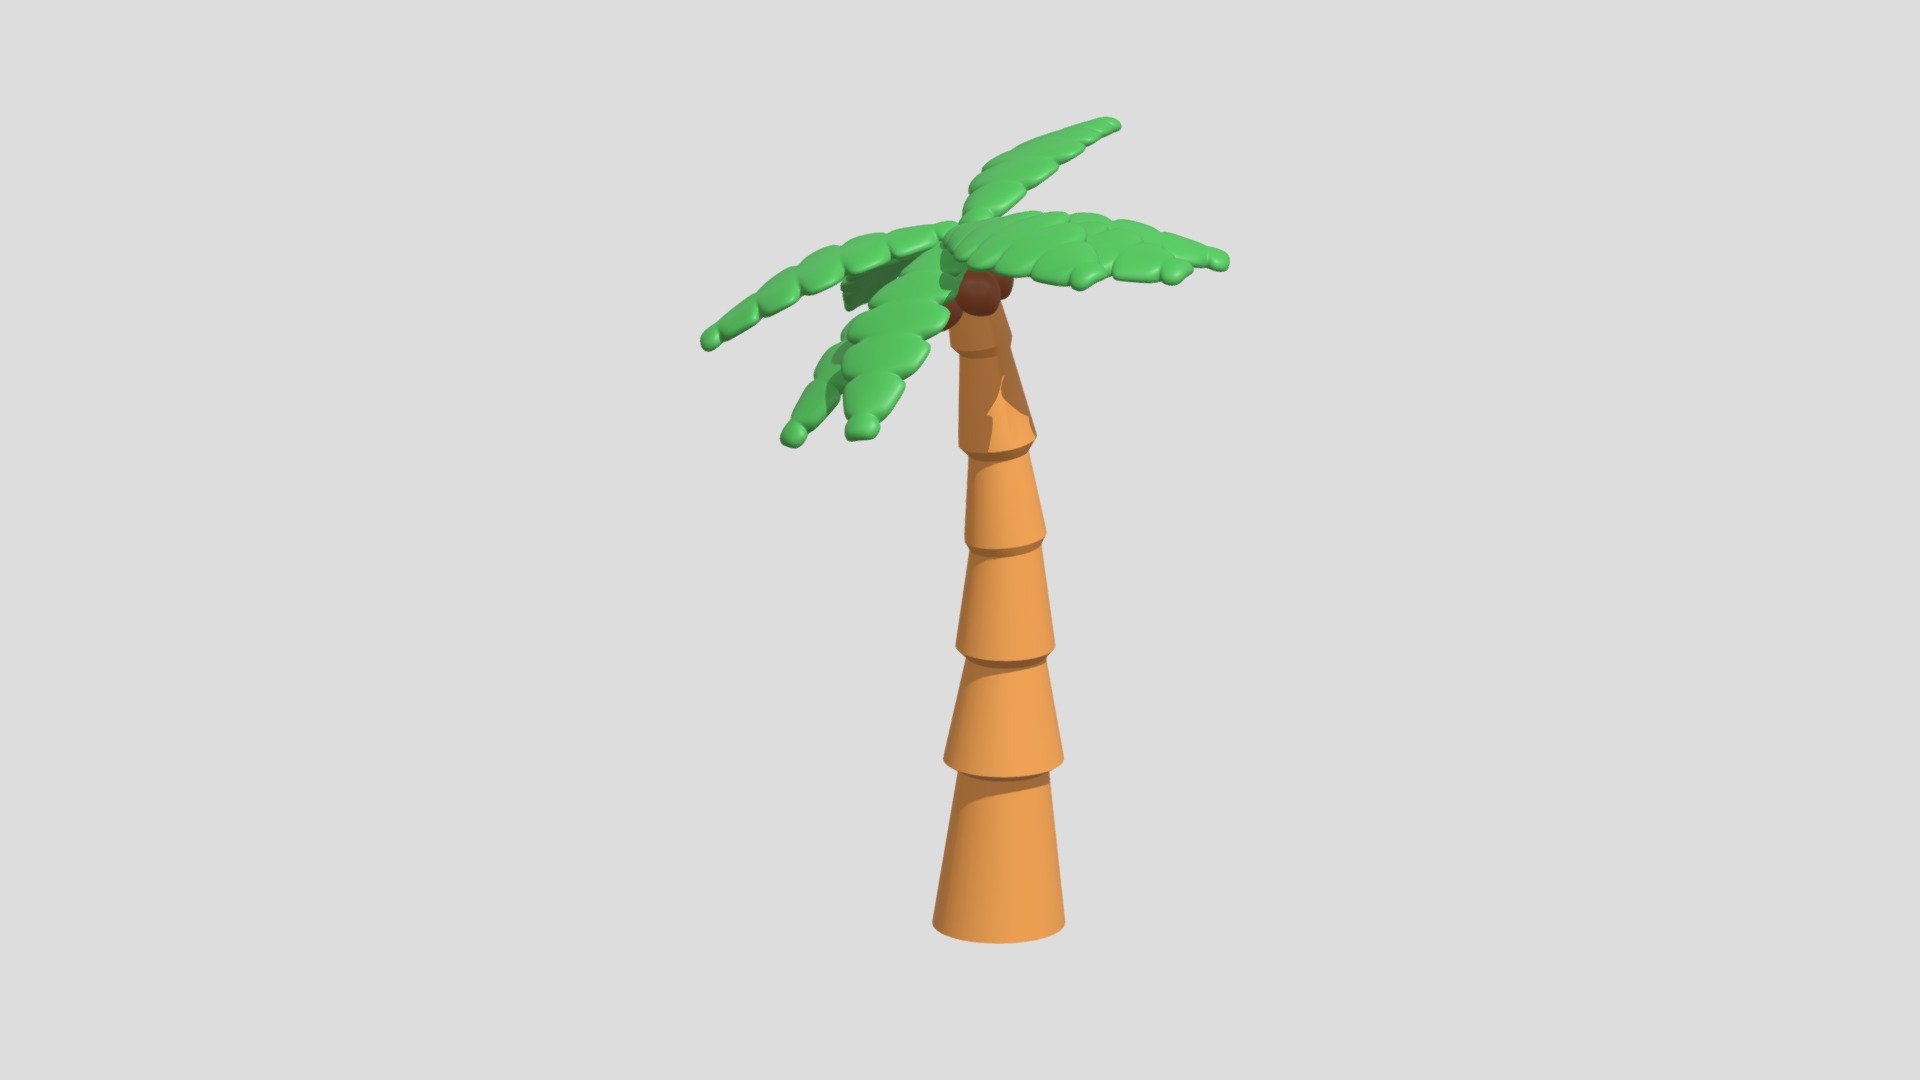 -Cartoon Palm Tree.

-This product contains 15 objects.

-Total vert: 26,418 poly: 26,380.

-This product was created in Blender 3.0.

-Formats: blend, fbx, obj, c4d, dae, abc, glb, stl, unity.

-We hope you enjoy this model.

-Thank you 3d model